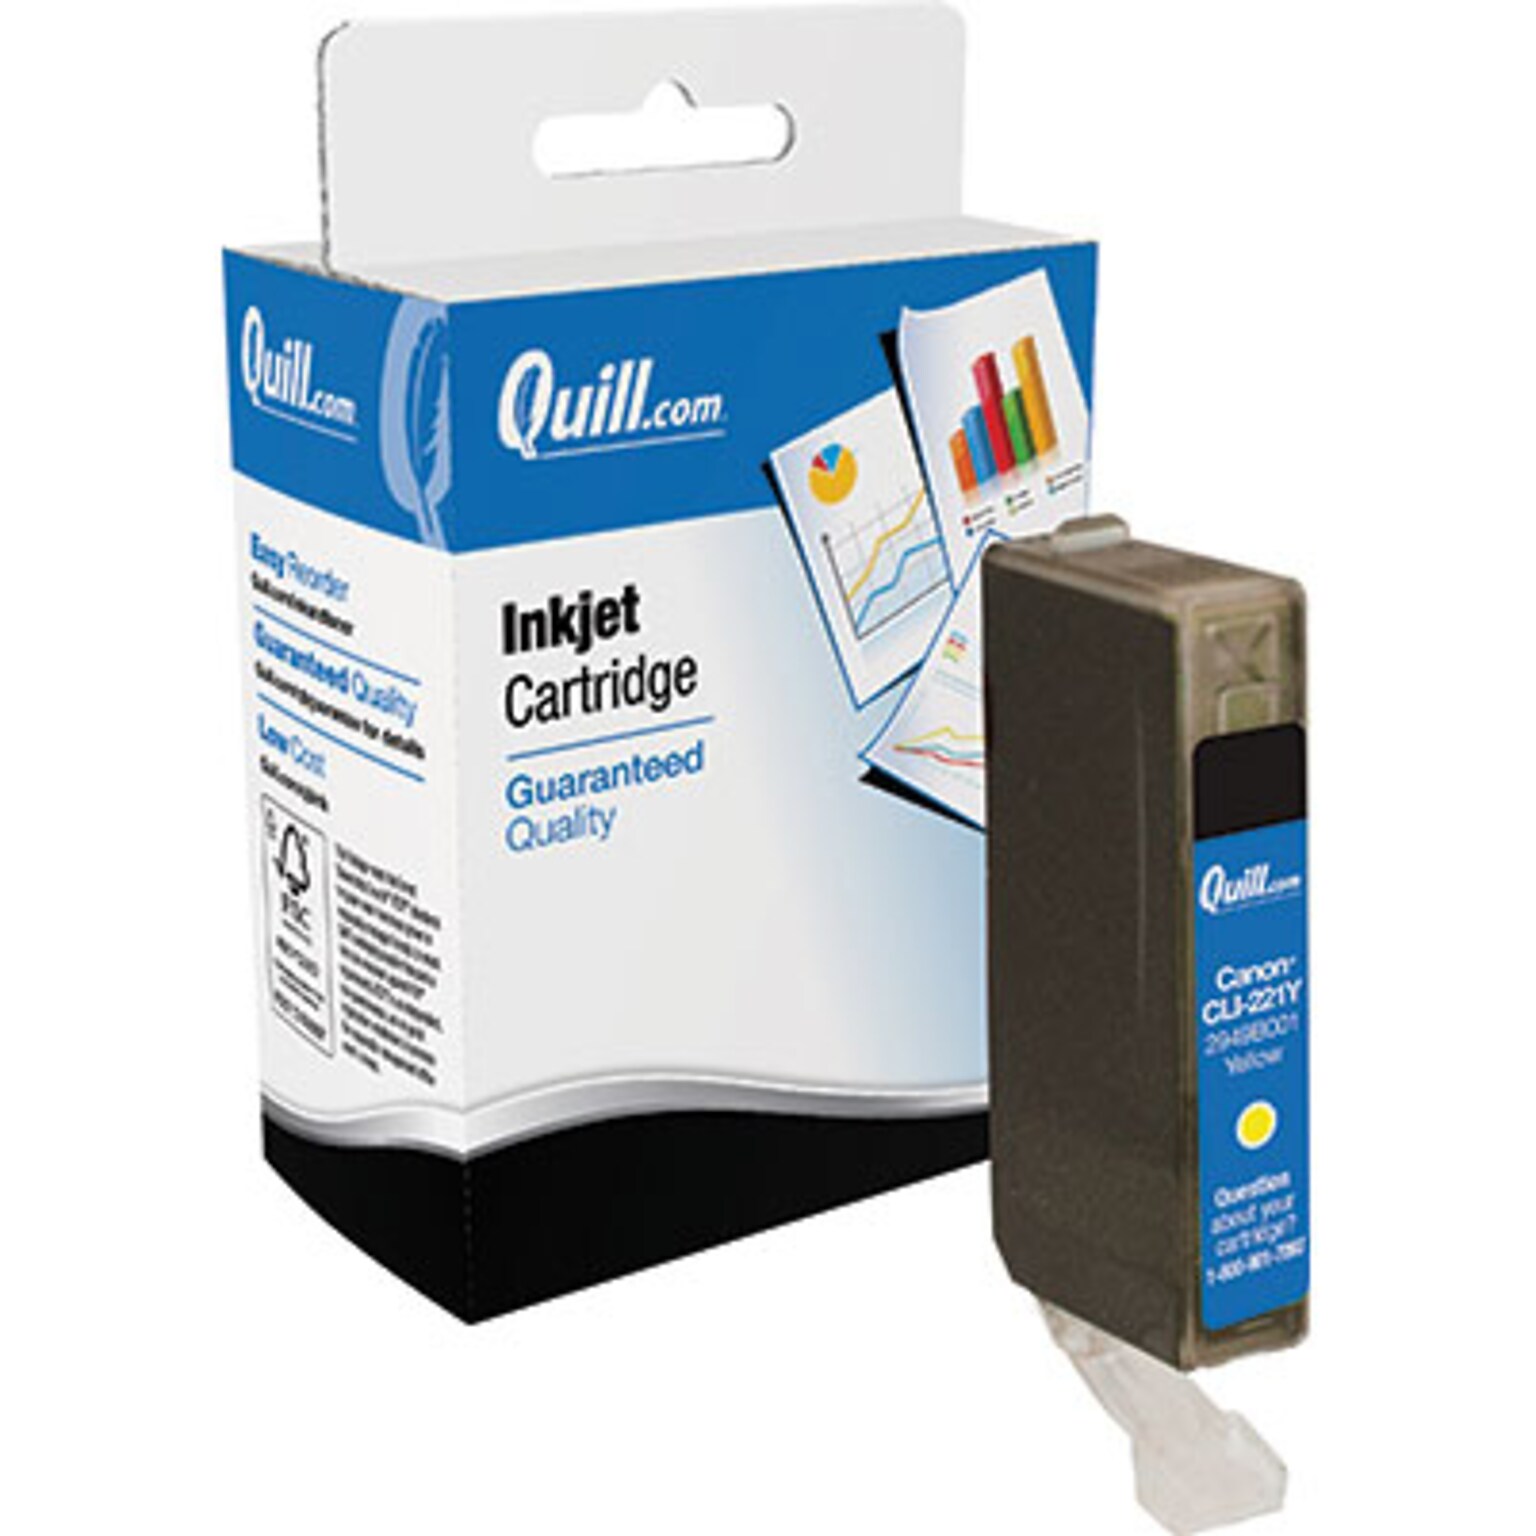 Quill Brand Remanufactured Ink Cartridge Comparable to Canon® CLI-221Y Yellow (100% Satisfaction Guaranteed)